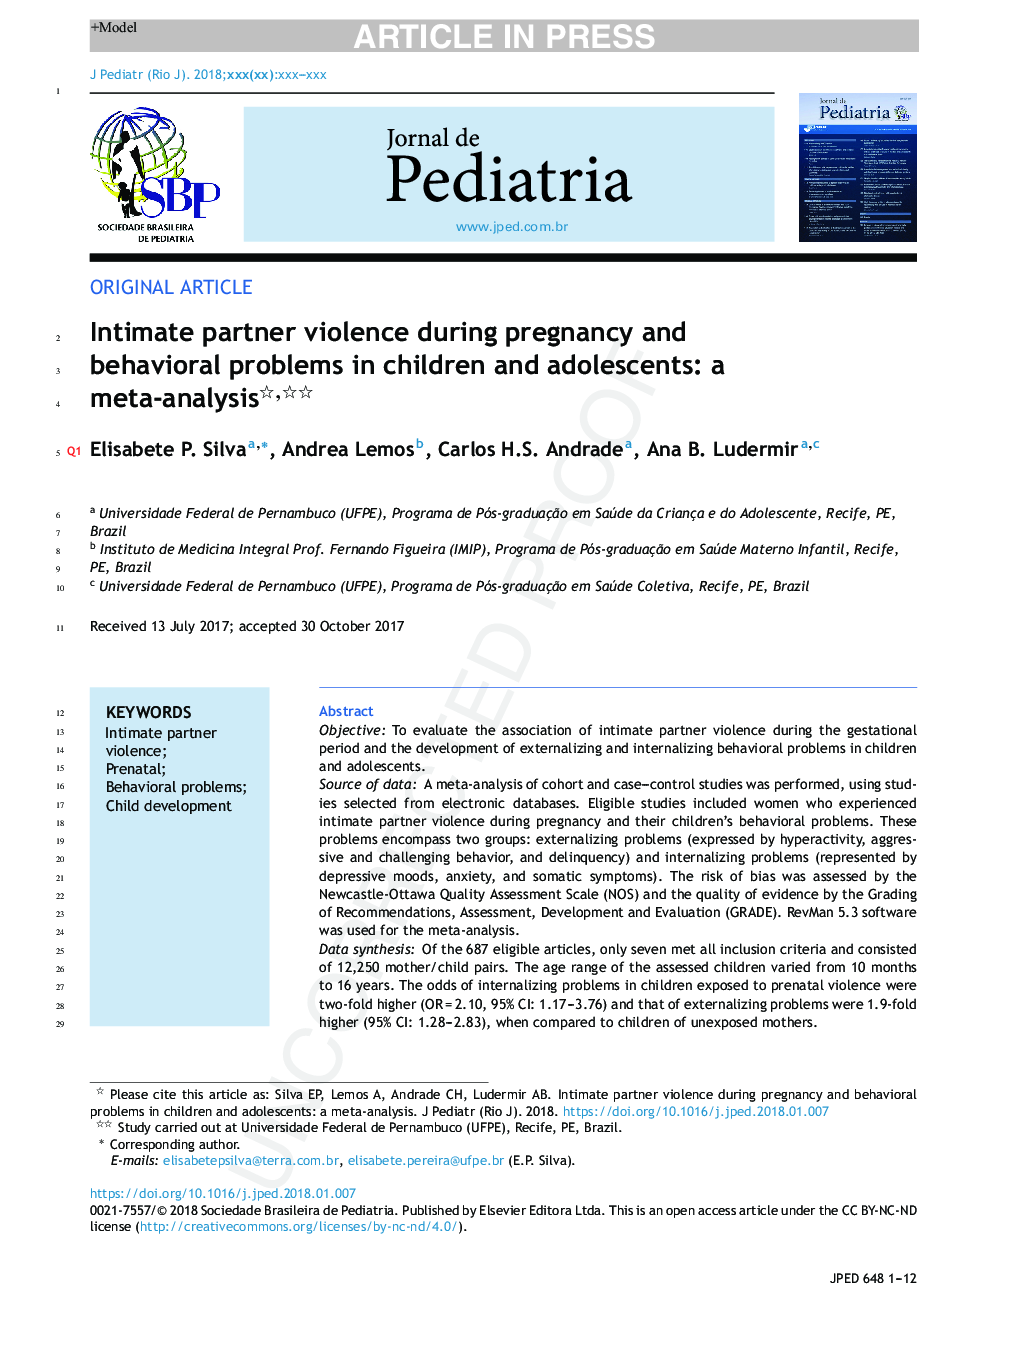 Intimate partner violence during pregnancy and behavioral problems in children and adolescents: a meta-analysis